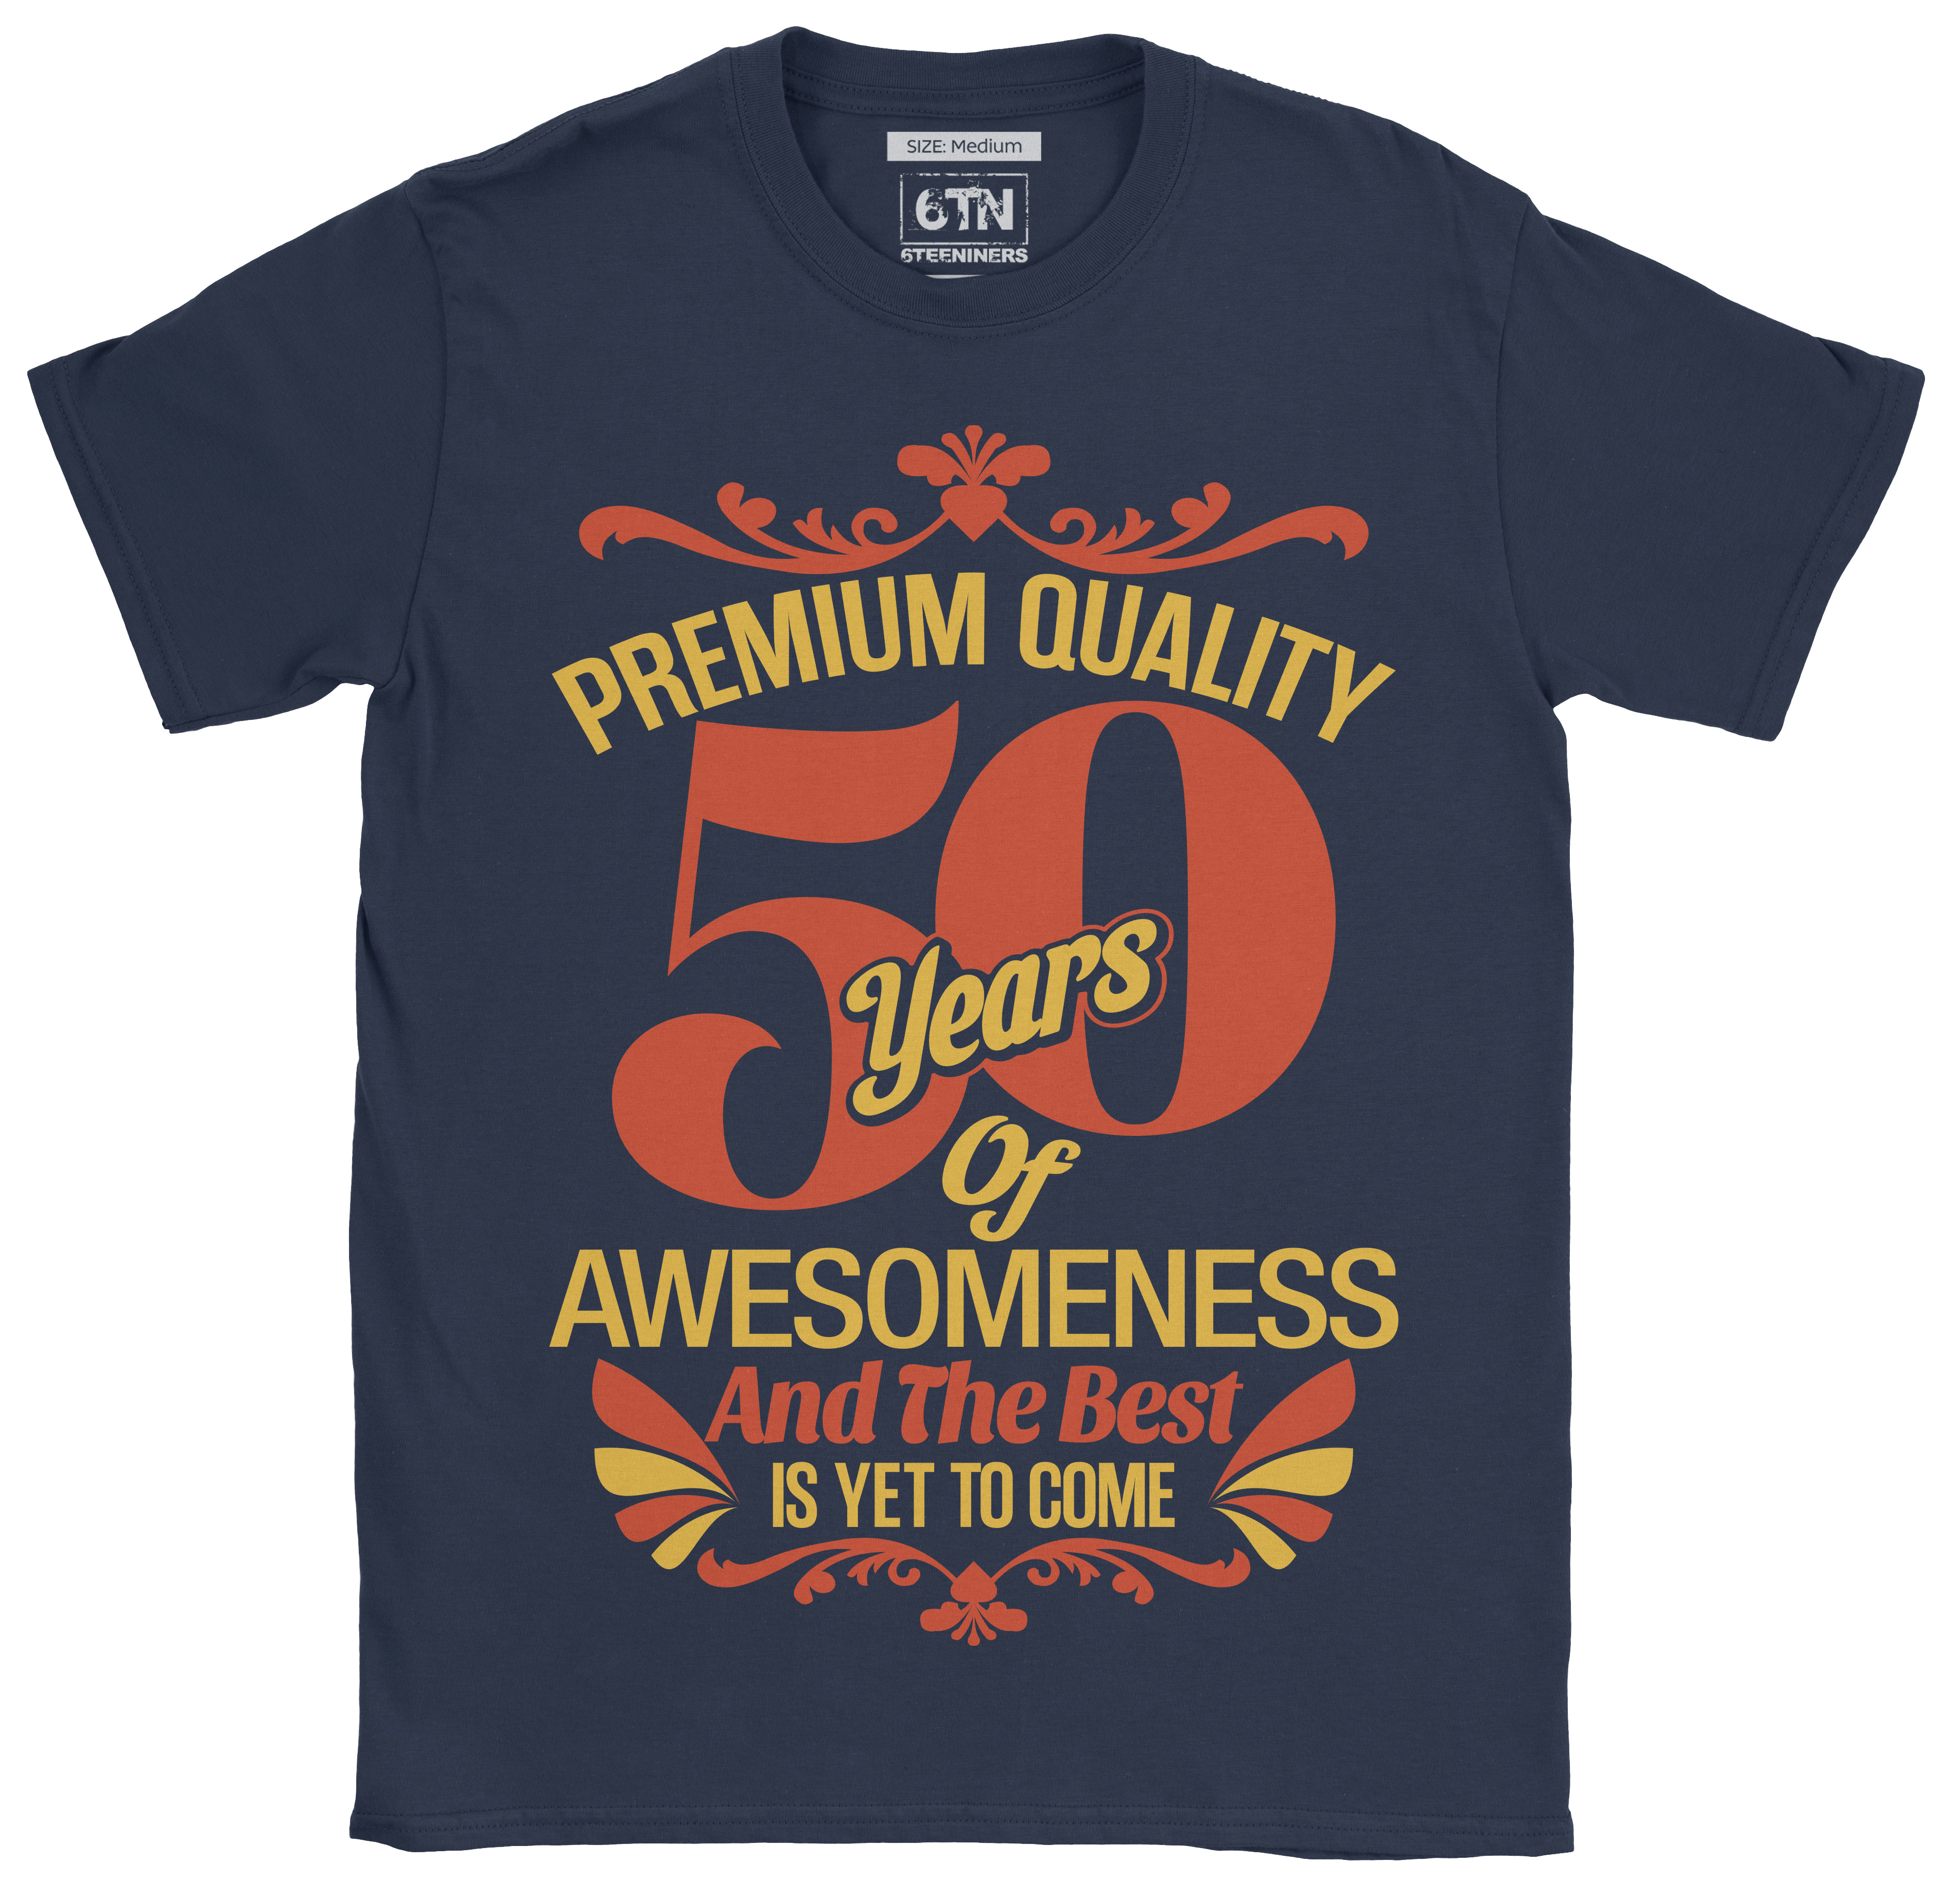 50th Birthday T Shirt for men Premium Quality 50 Years Of Awesome and the Best Is yet to Come UK